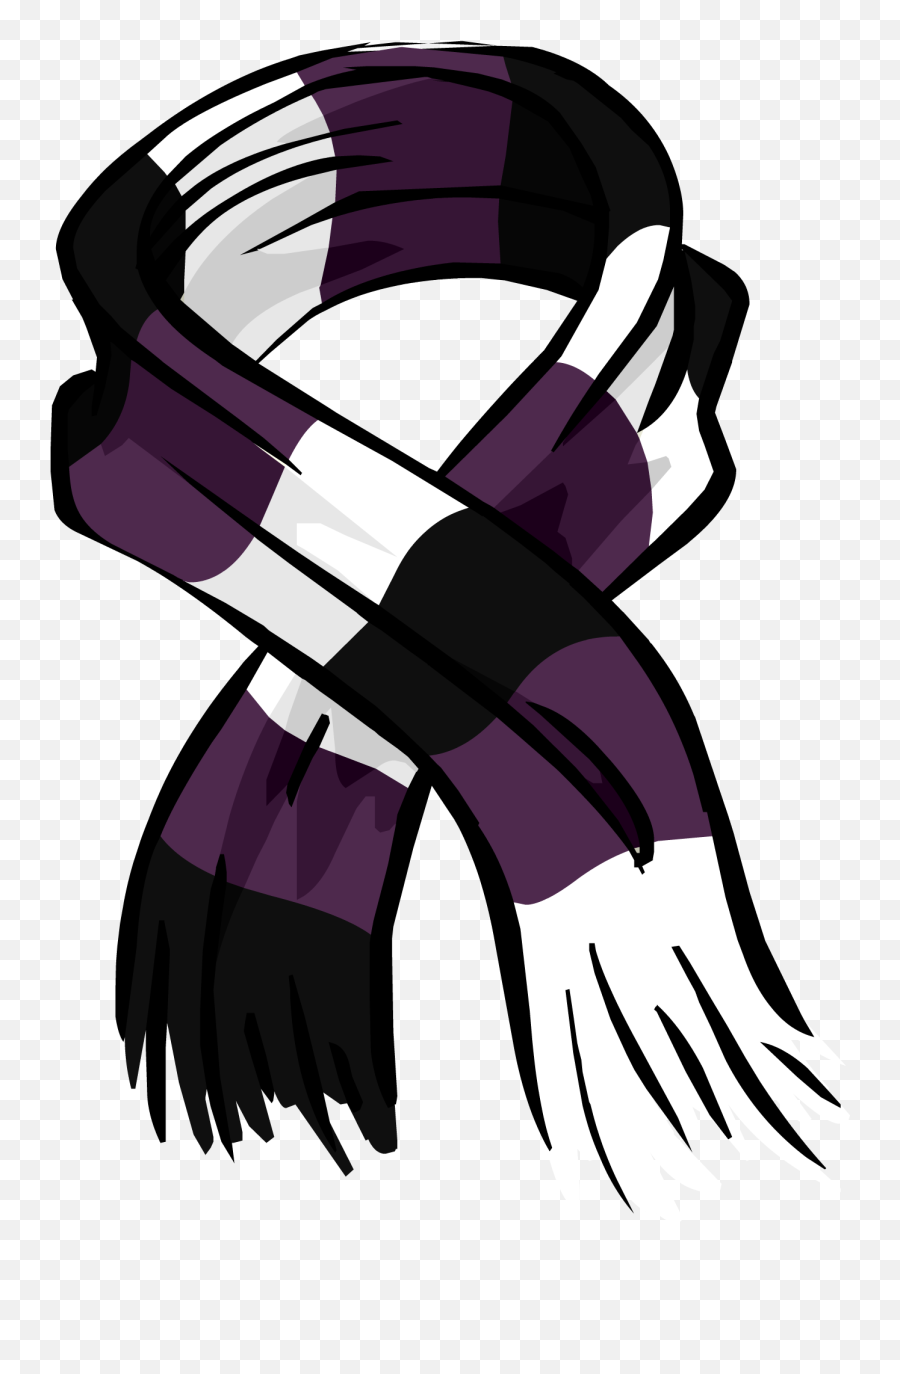 Scarf Cartoon Png 5 Image - Red Scarf Clipart,Scarf Transparent Background